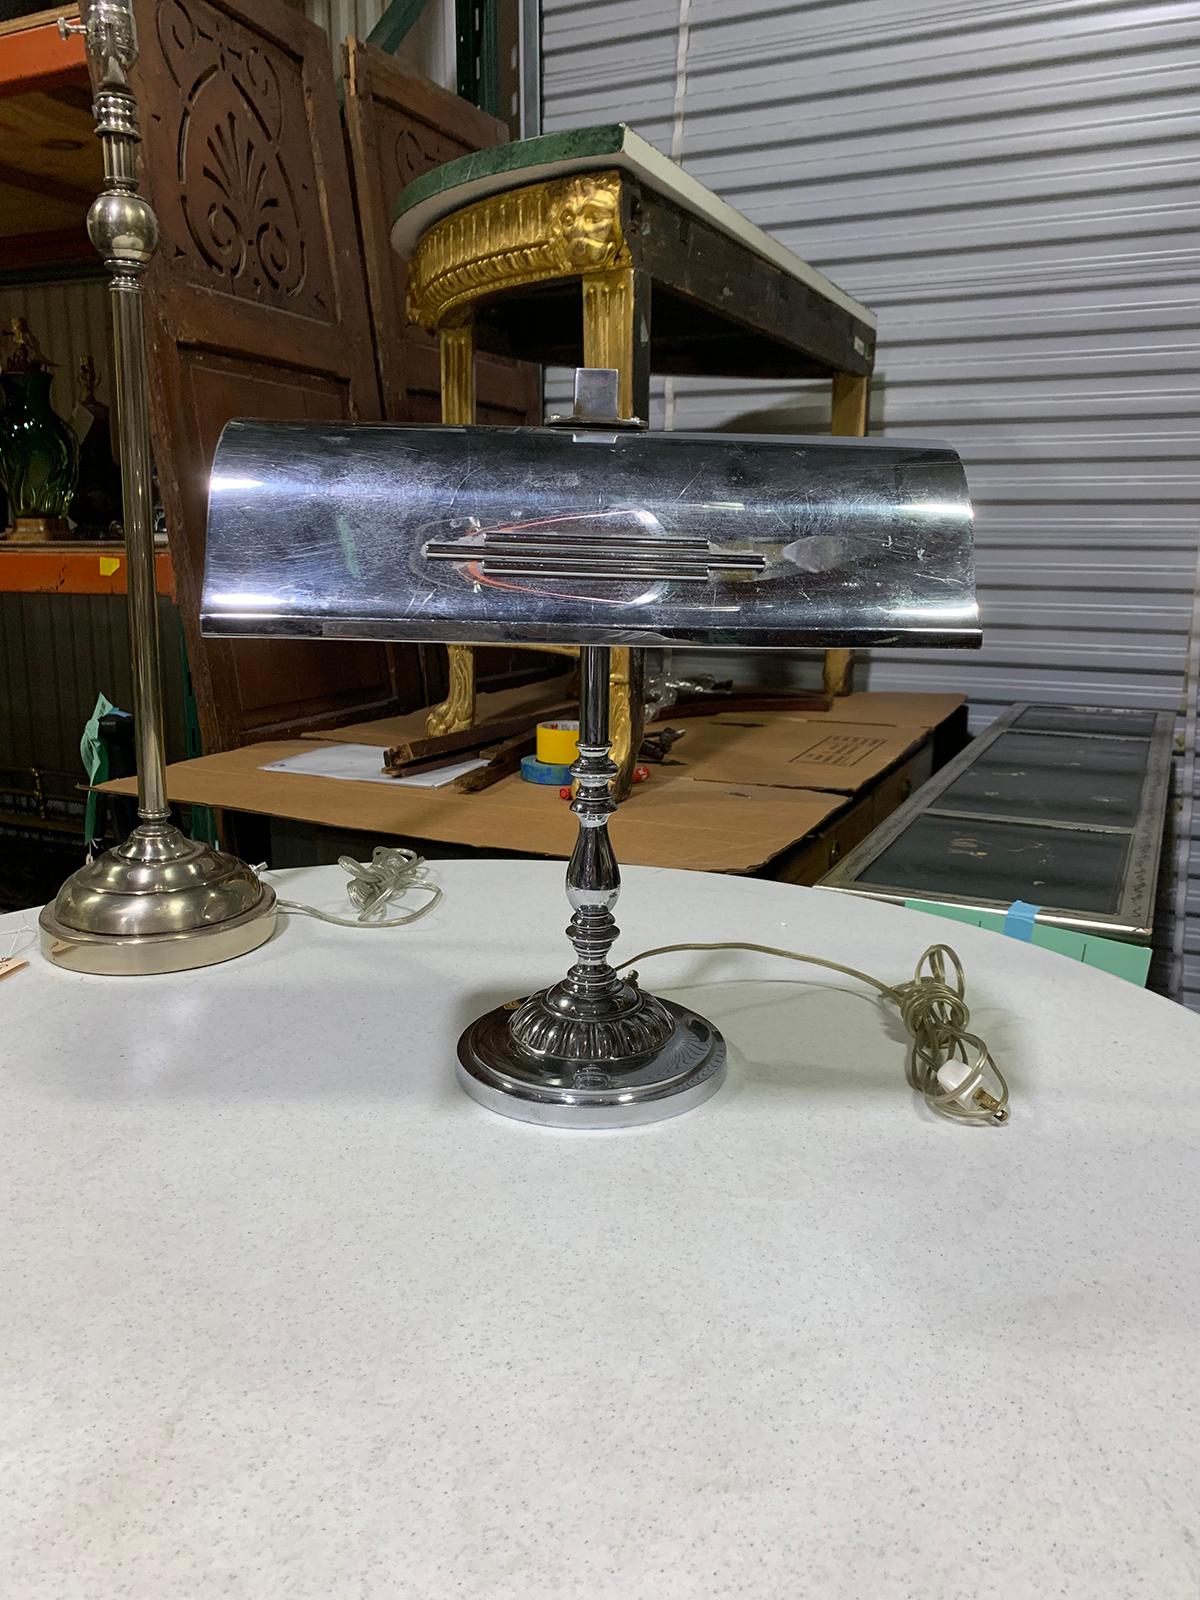 20th century polished steel desk lamp
New wiring.